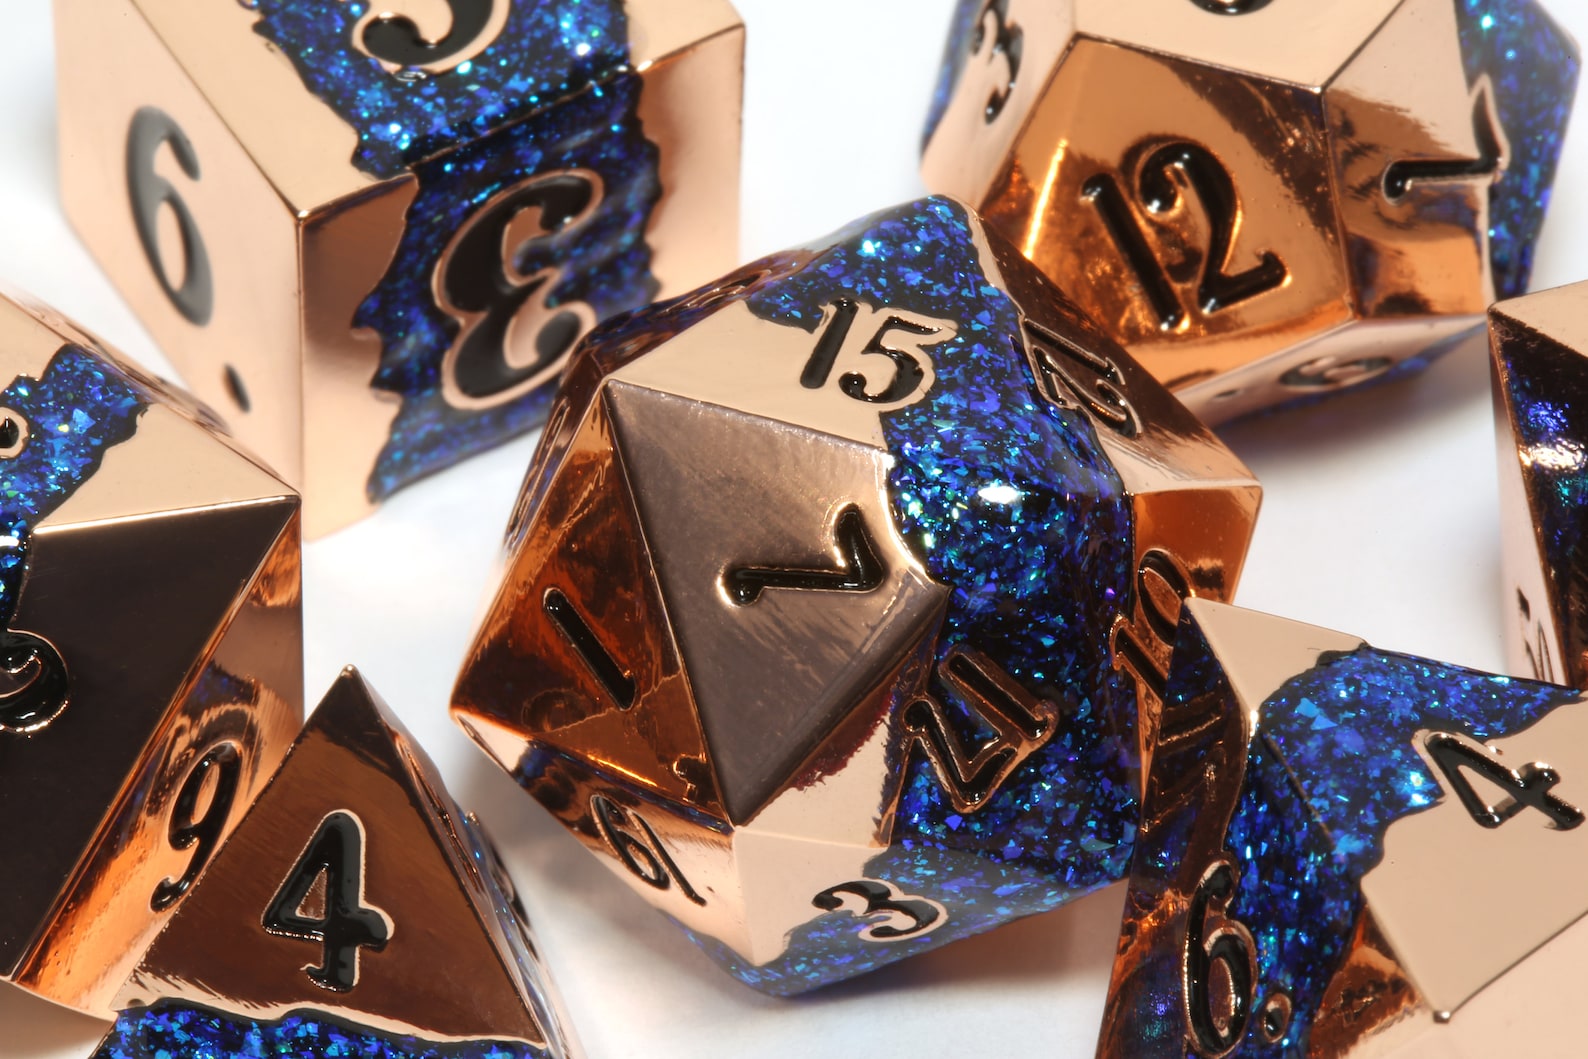 Mana Ore, Blue mica stripe dice set with shiny copper metal - The Wizard's Vault